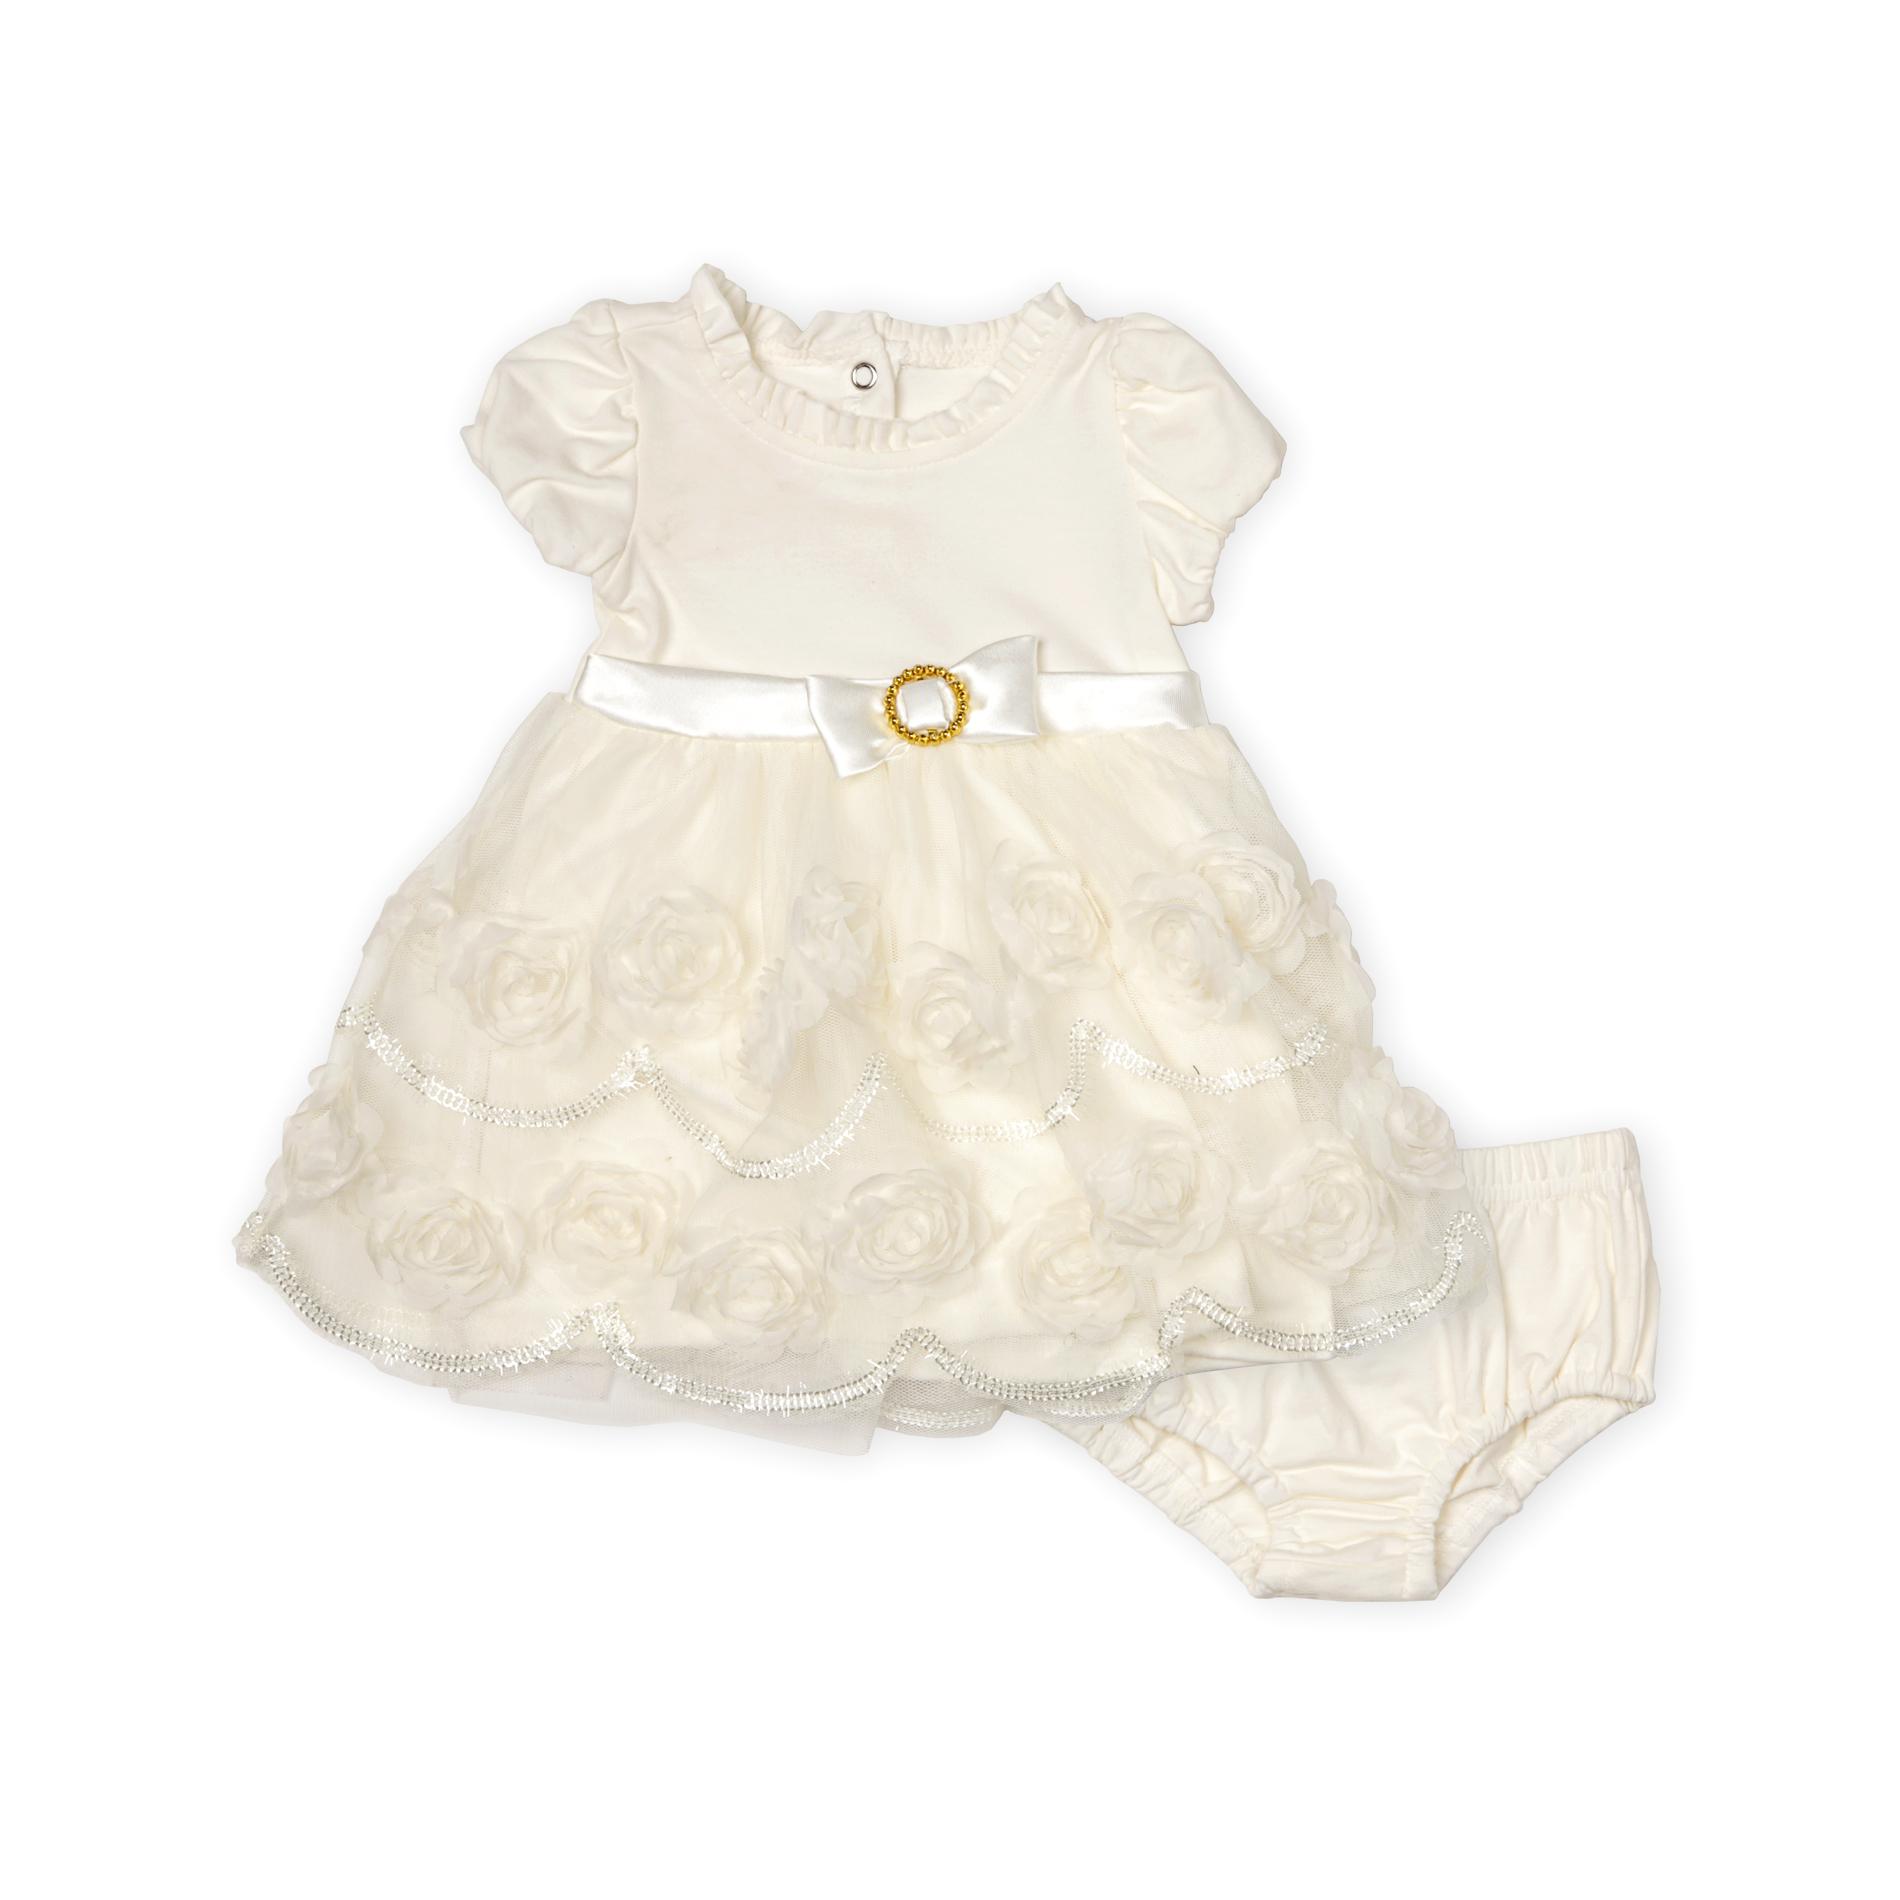 Baby Grand Signature Infant Girl's Occasion Dress & Diaper Cover - Satin & Rosettes